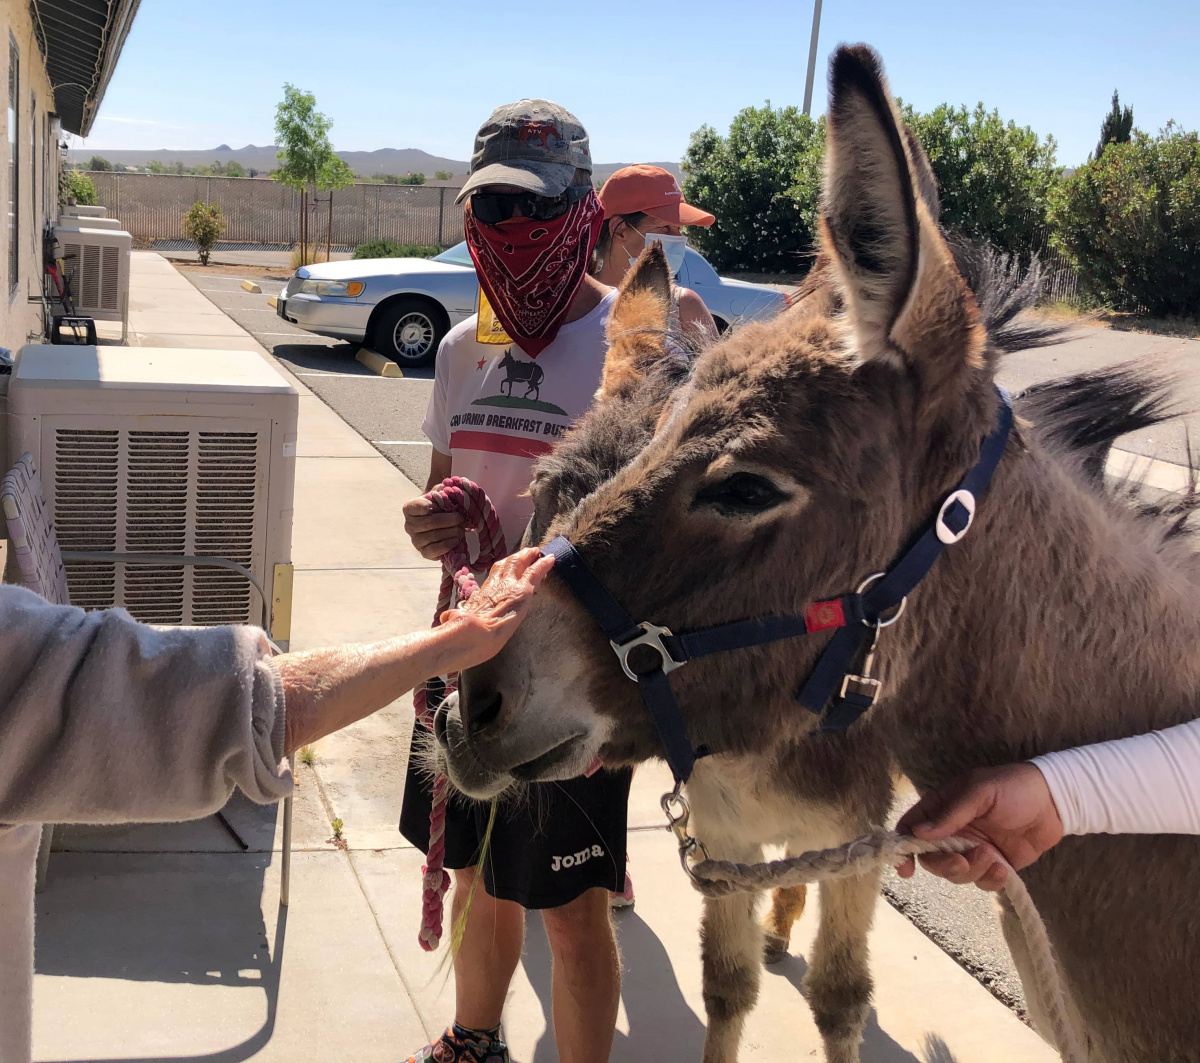 Two burros getting pet by people. 